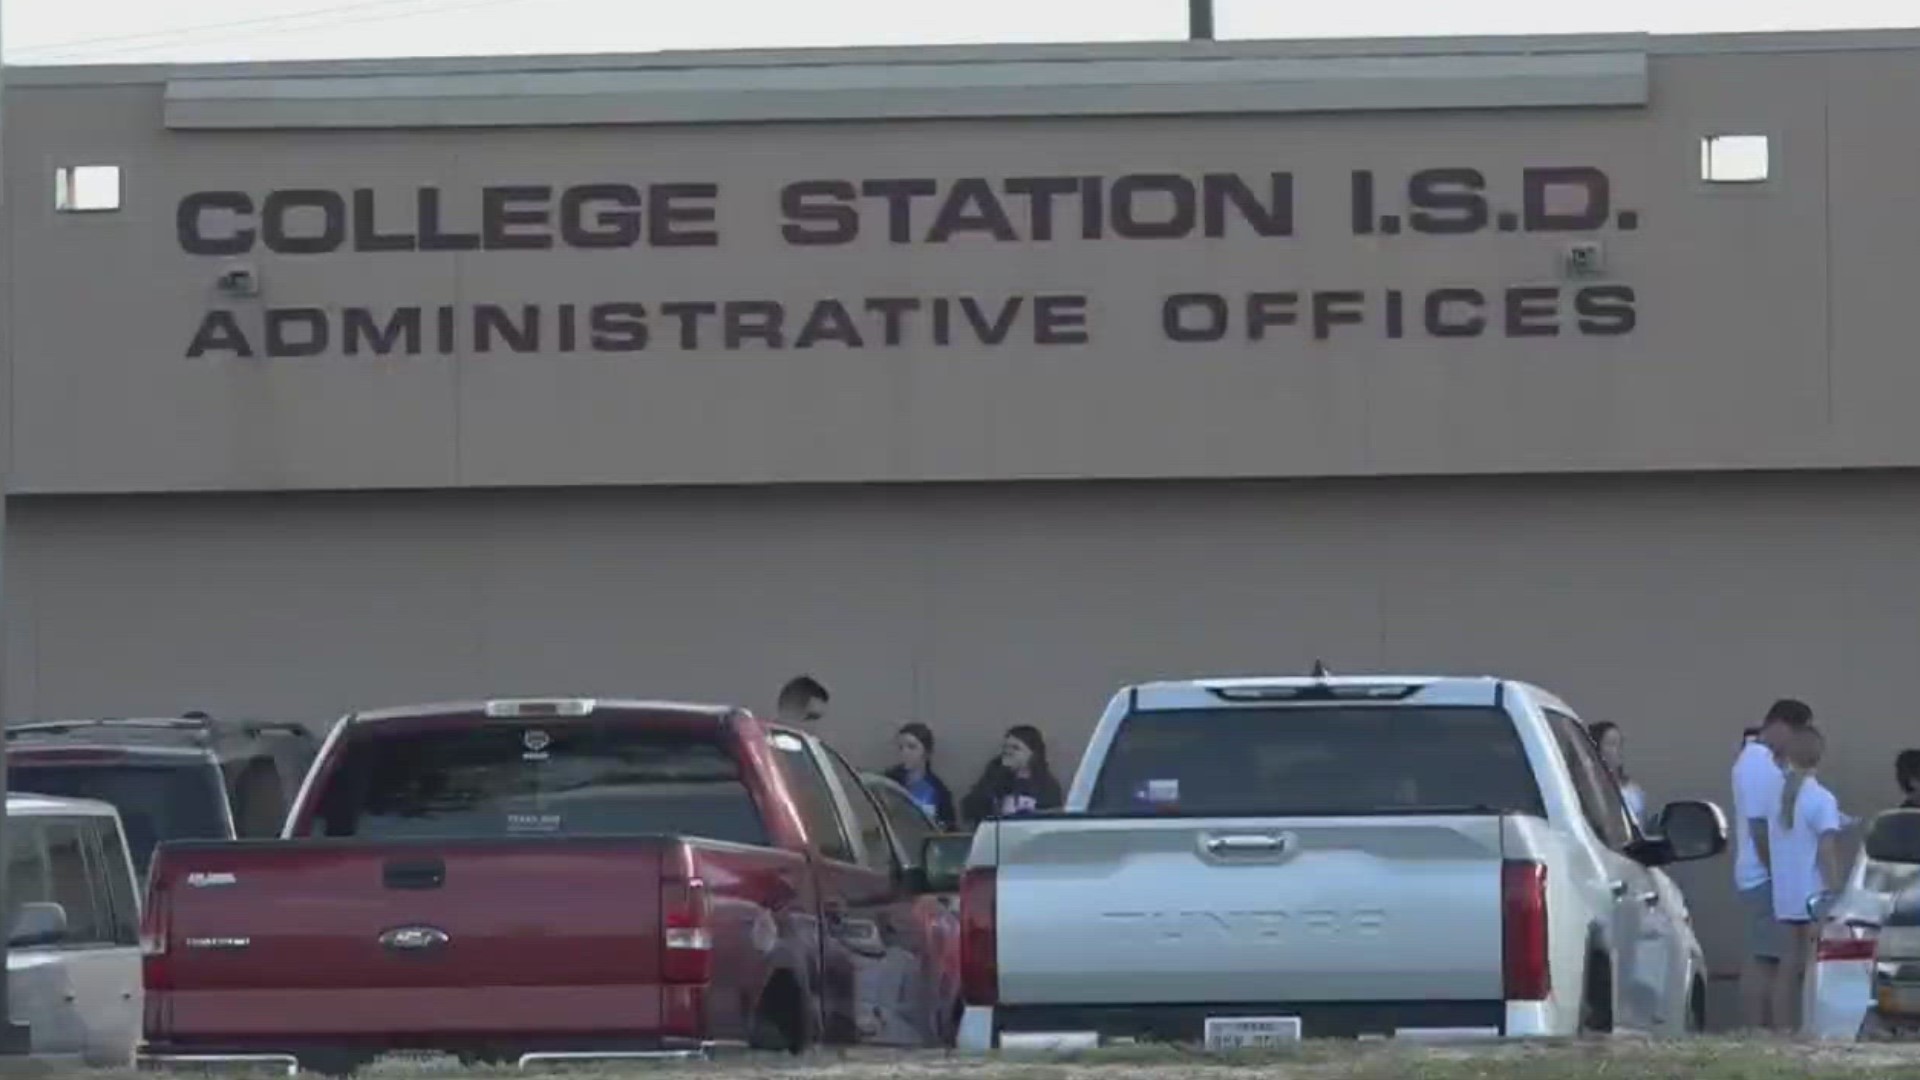 A College Station ISD committee recommends a $350 million bond